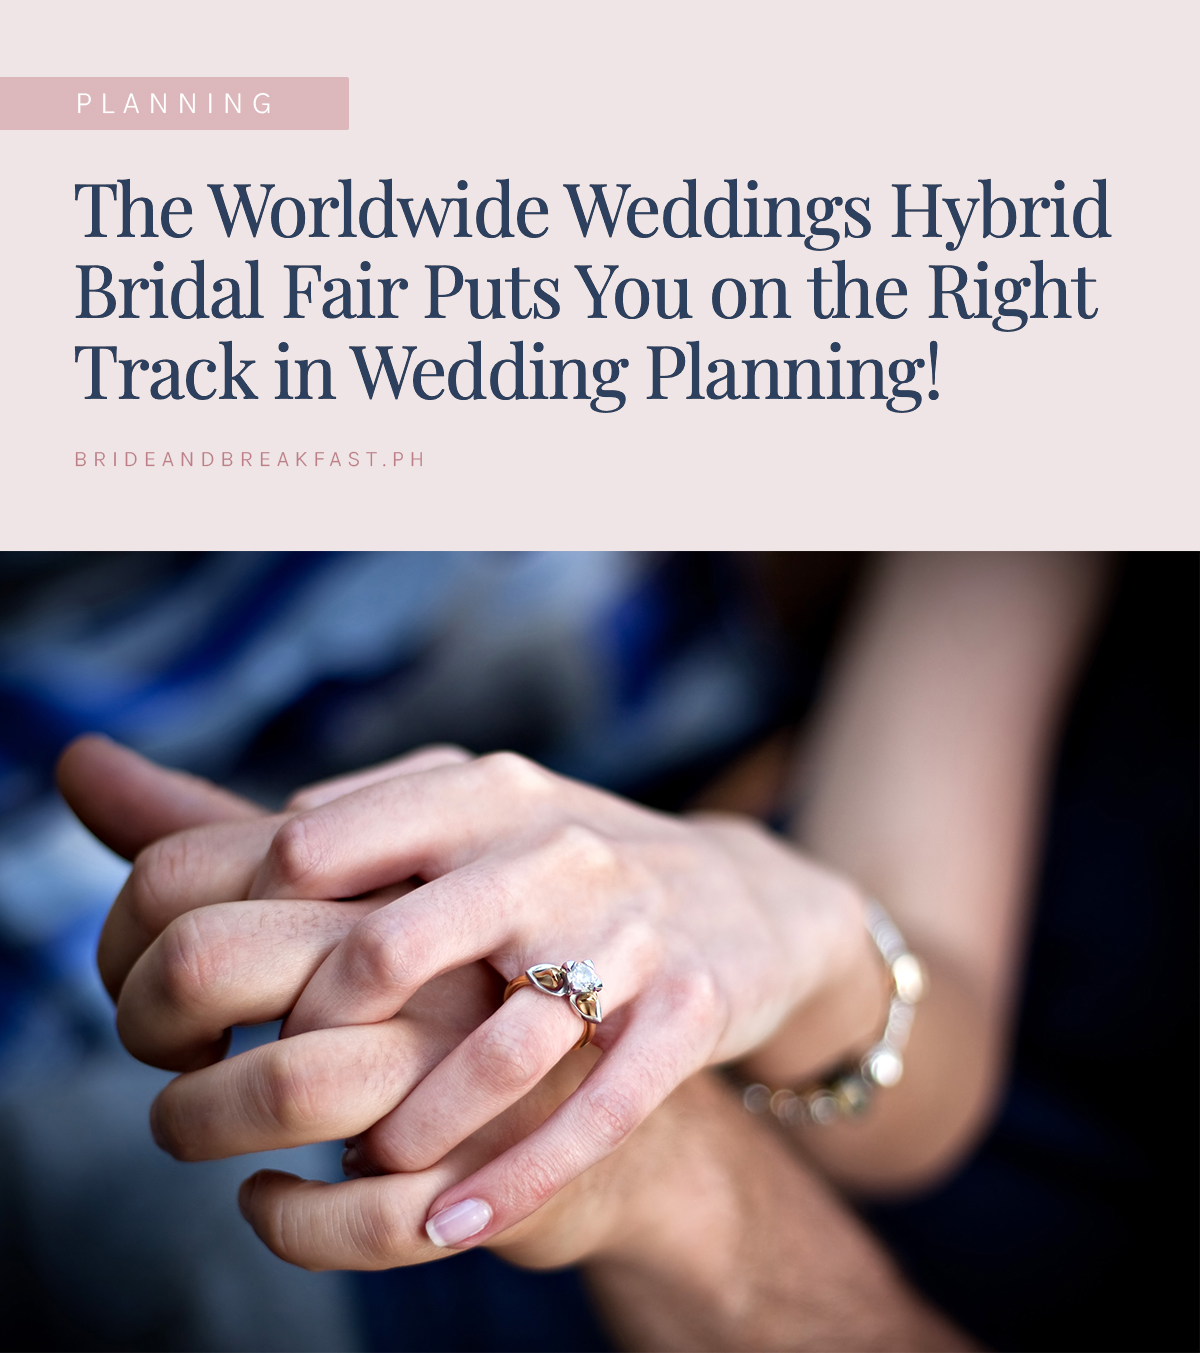 The Worldwide Weddings Hybrid Bridal Fair Puts You on the Right Track in Wedding Planning!